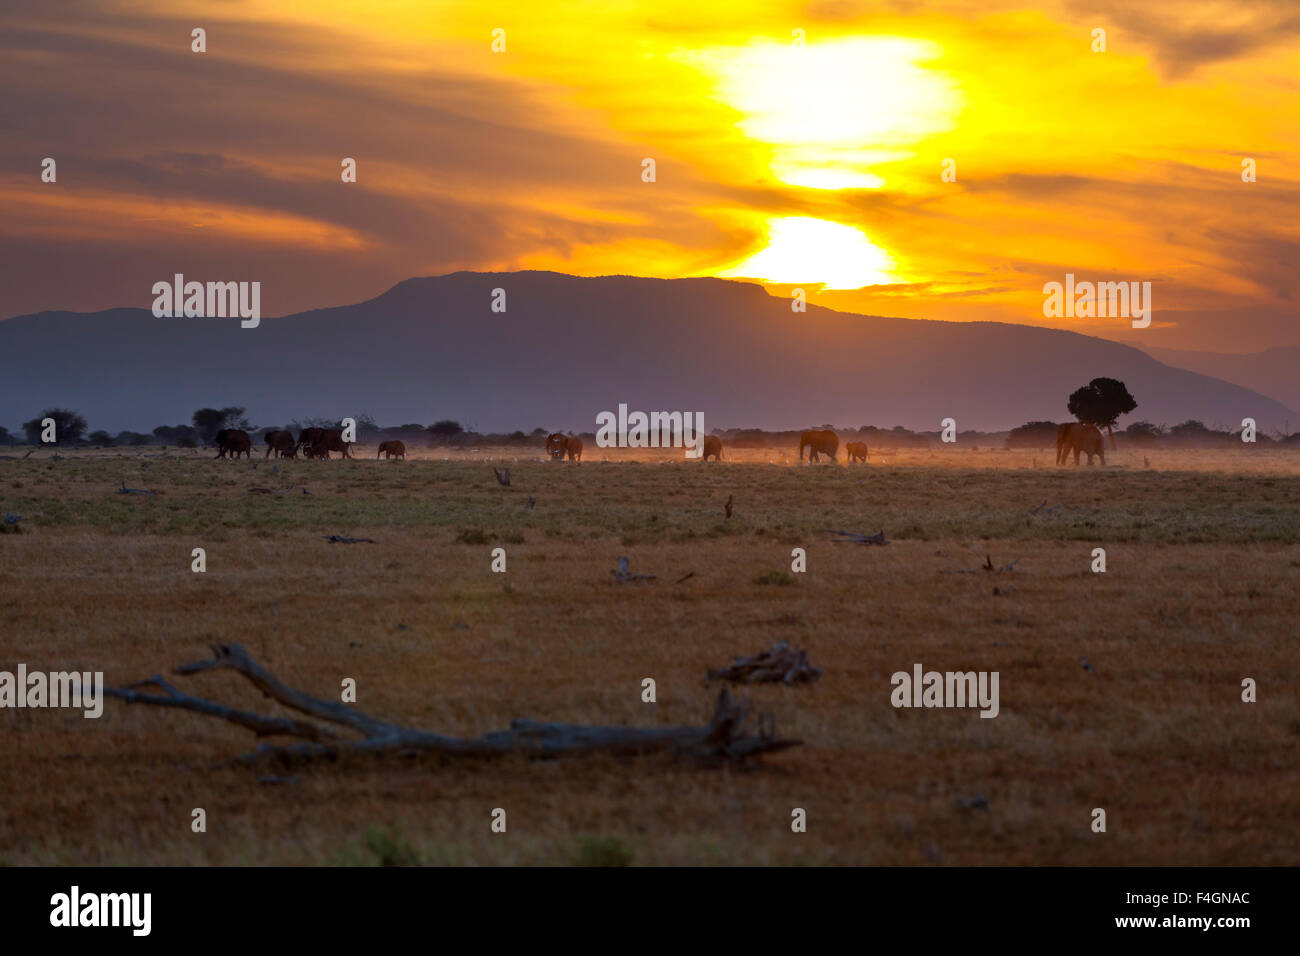 Sunset and landscape in Tsavo East National Park in Kenya with a group of elephants passing. Stock Photo